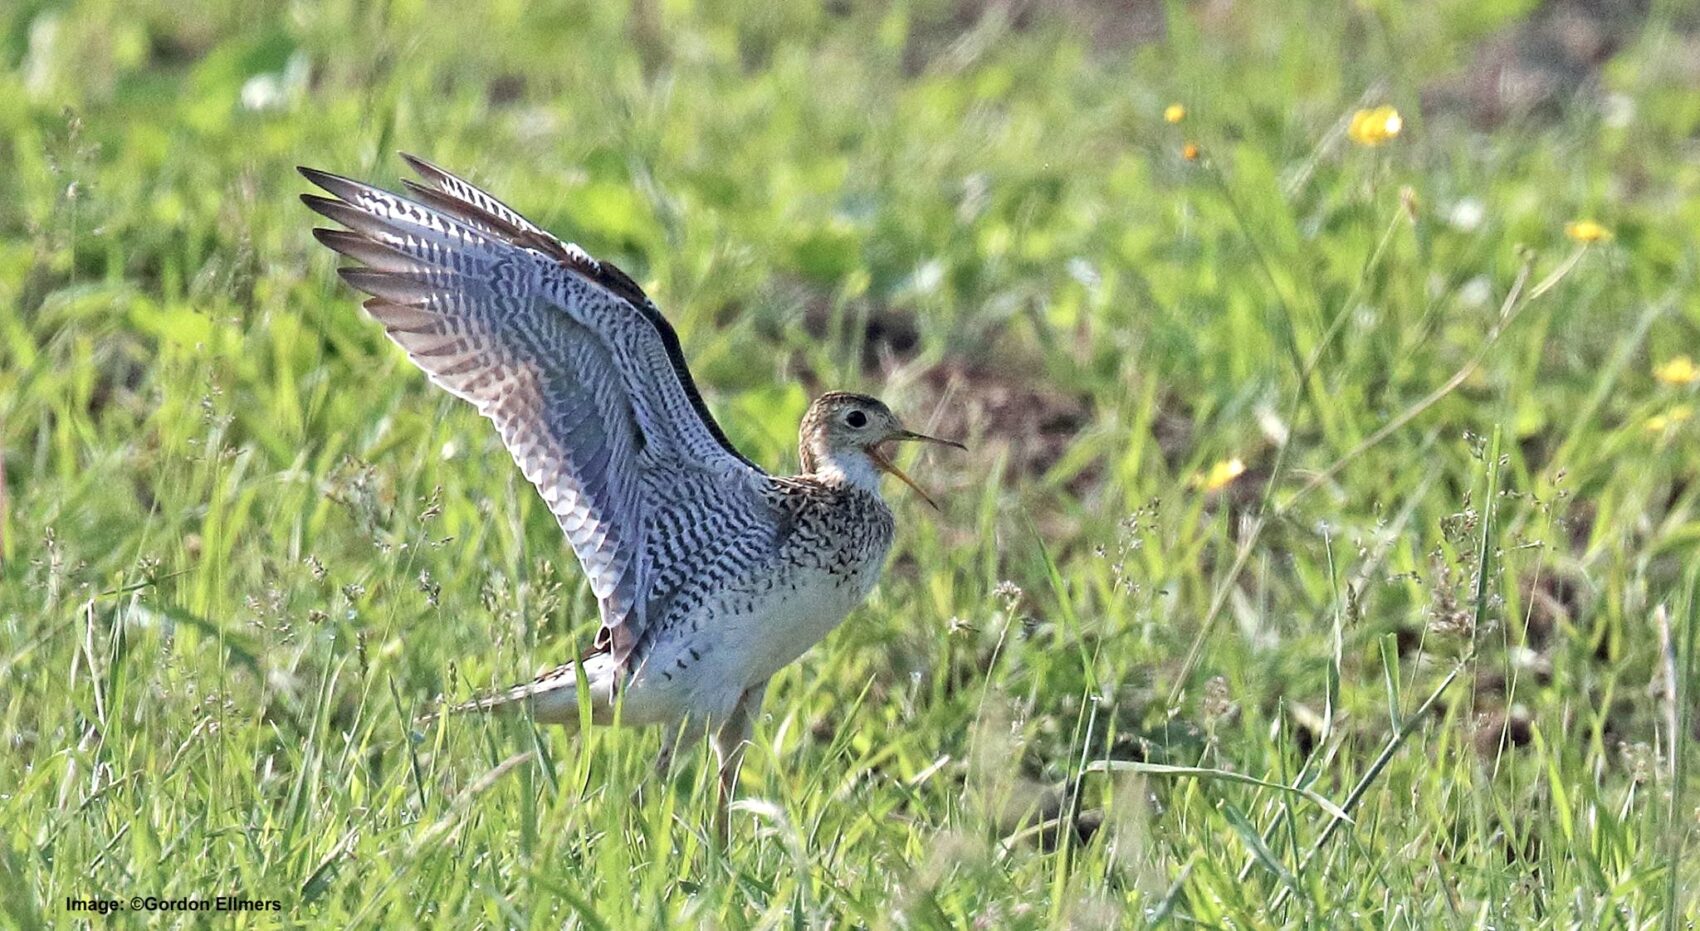 Upland Sandpiper displaying in the grasslands